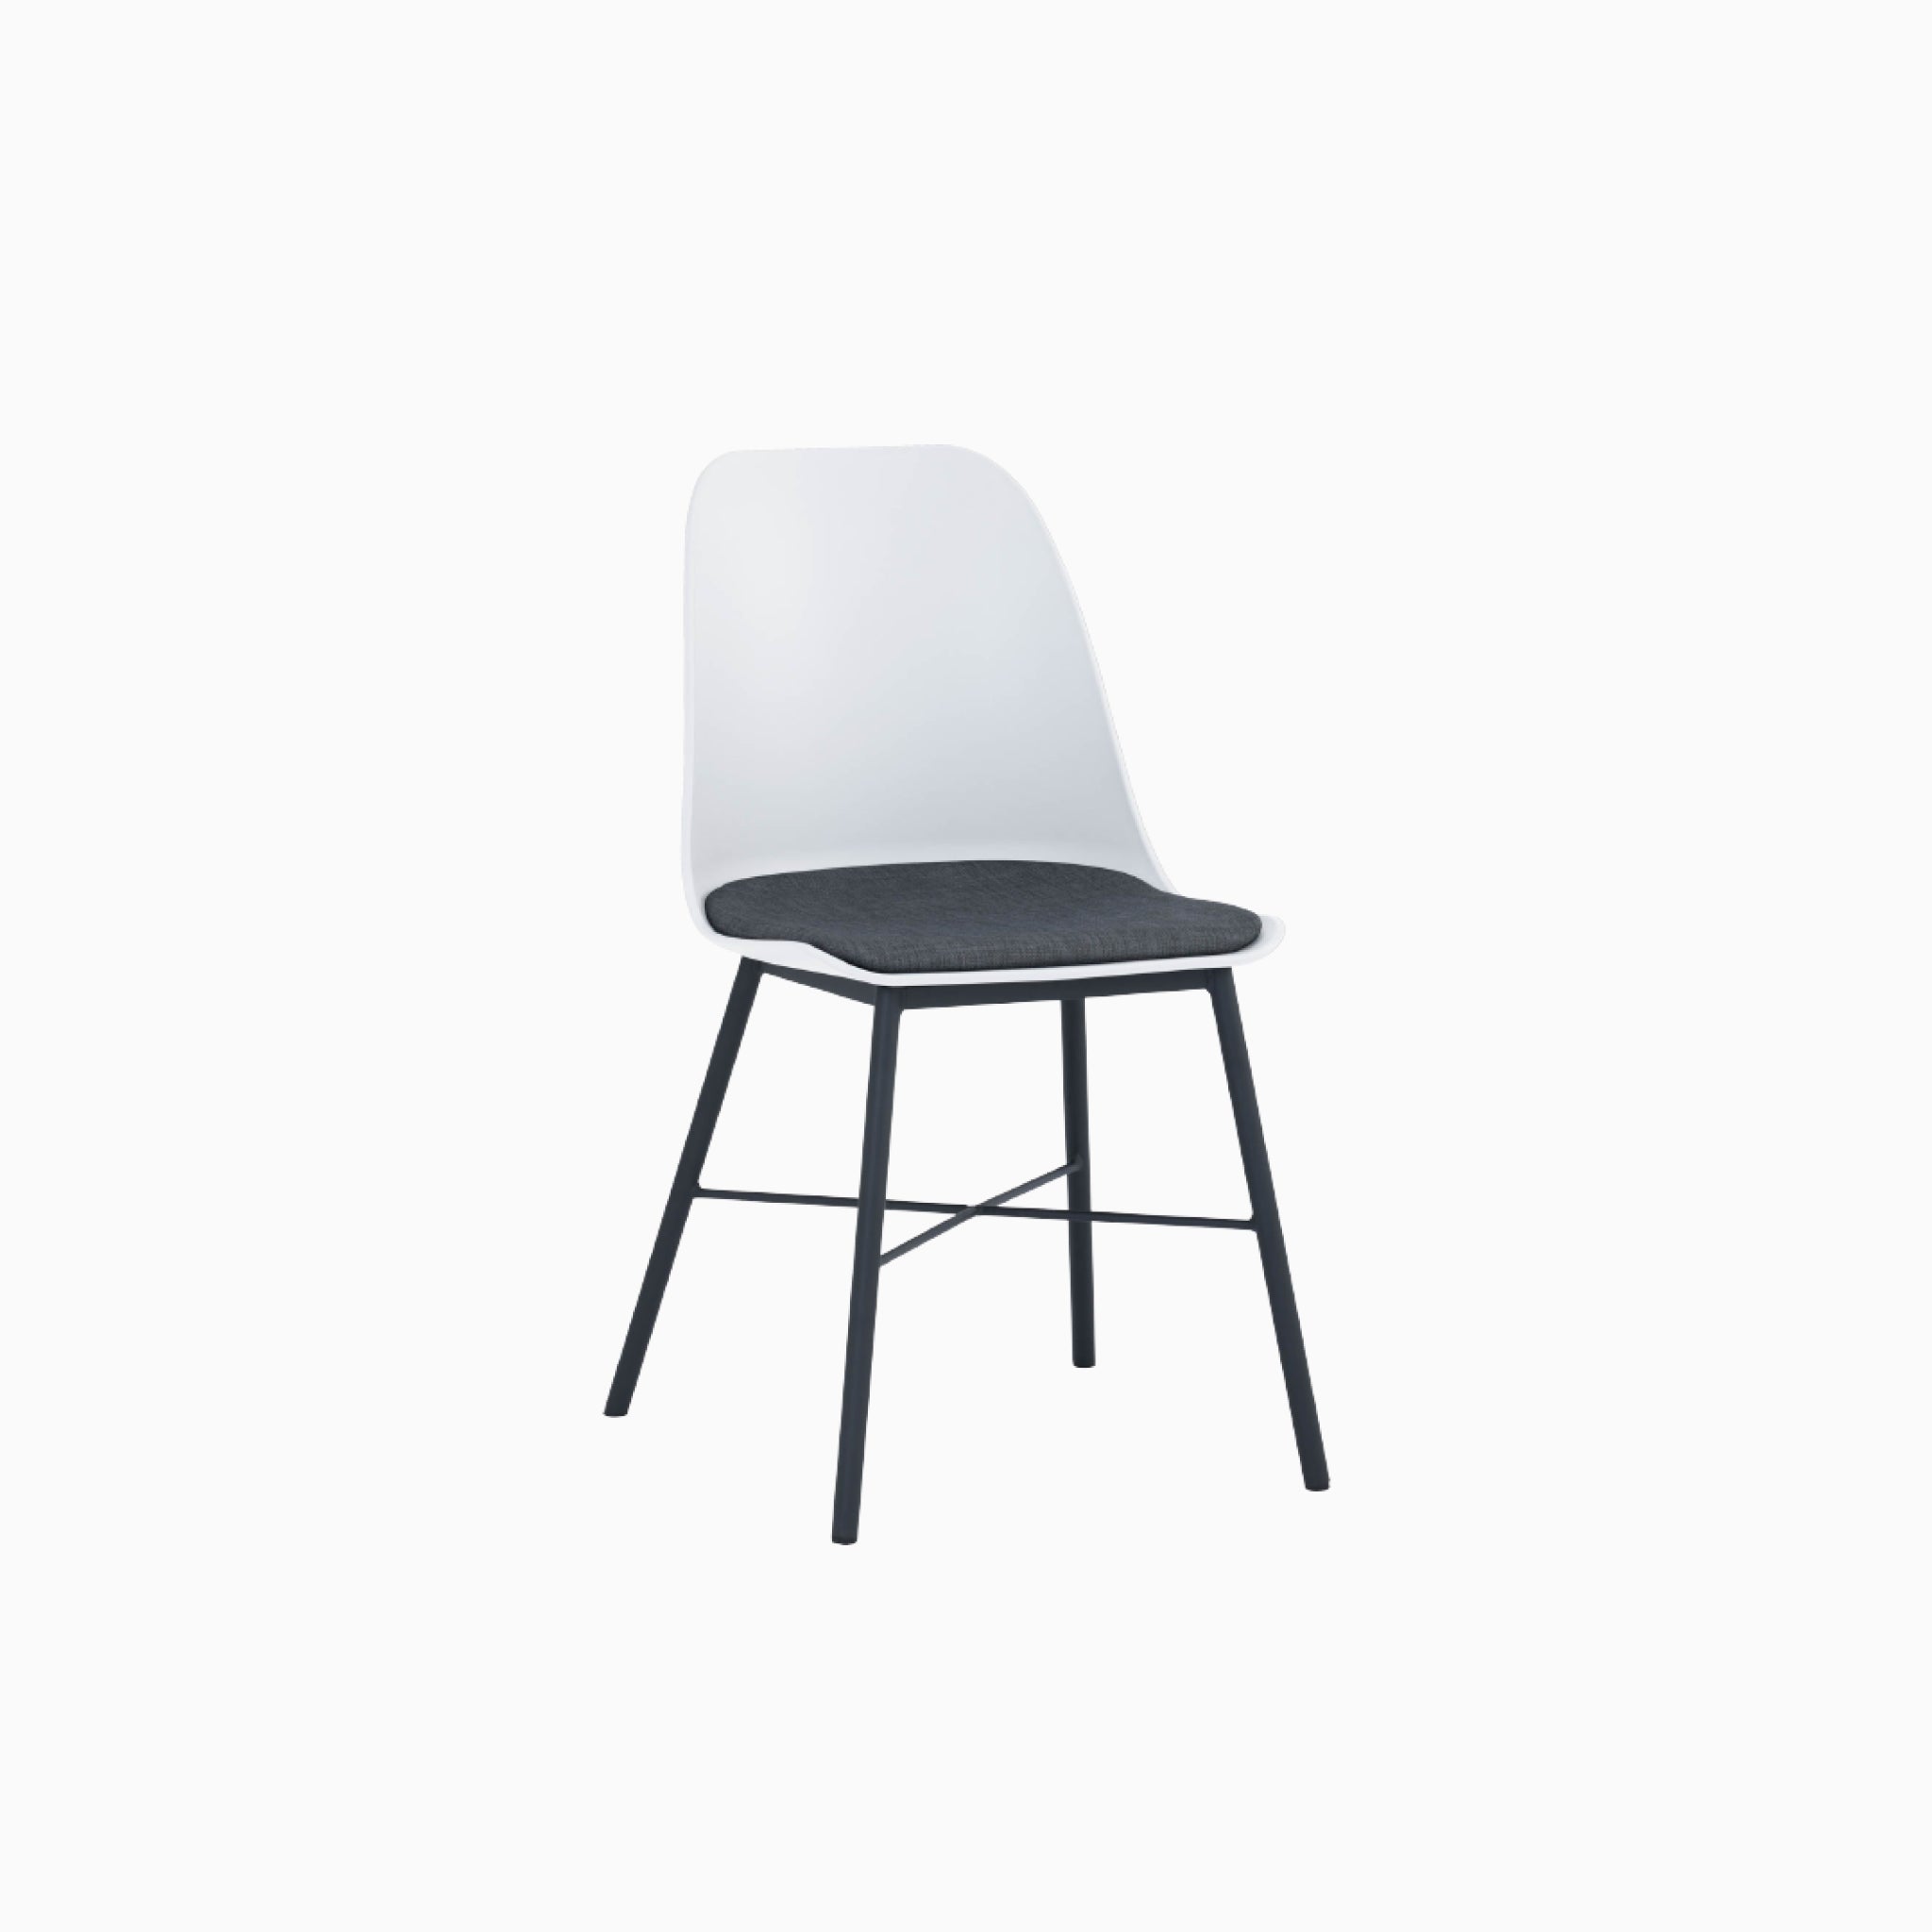 Lumo Blue Dining Chair with Black Leg (Set of 2)